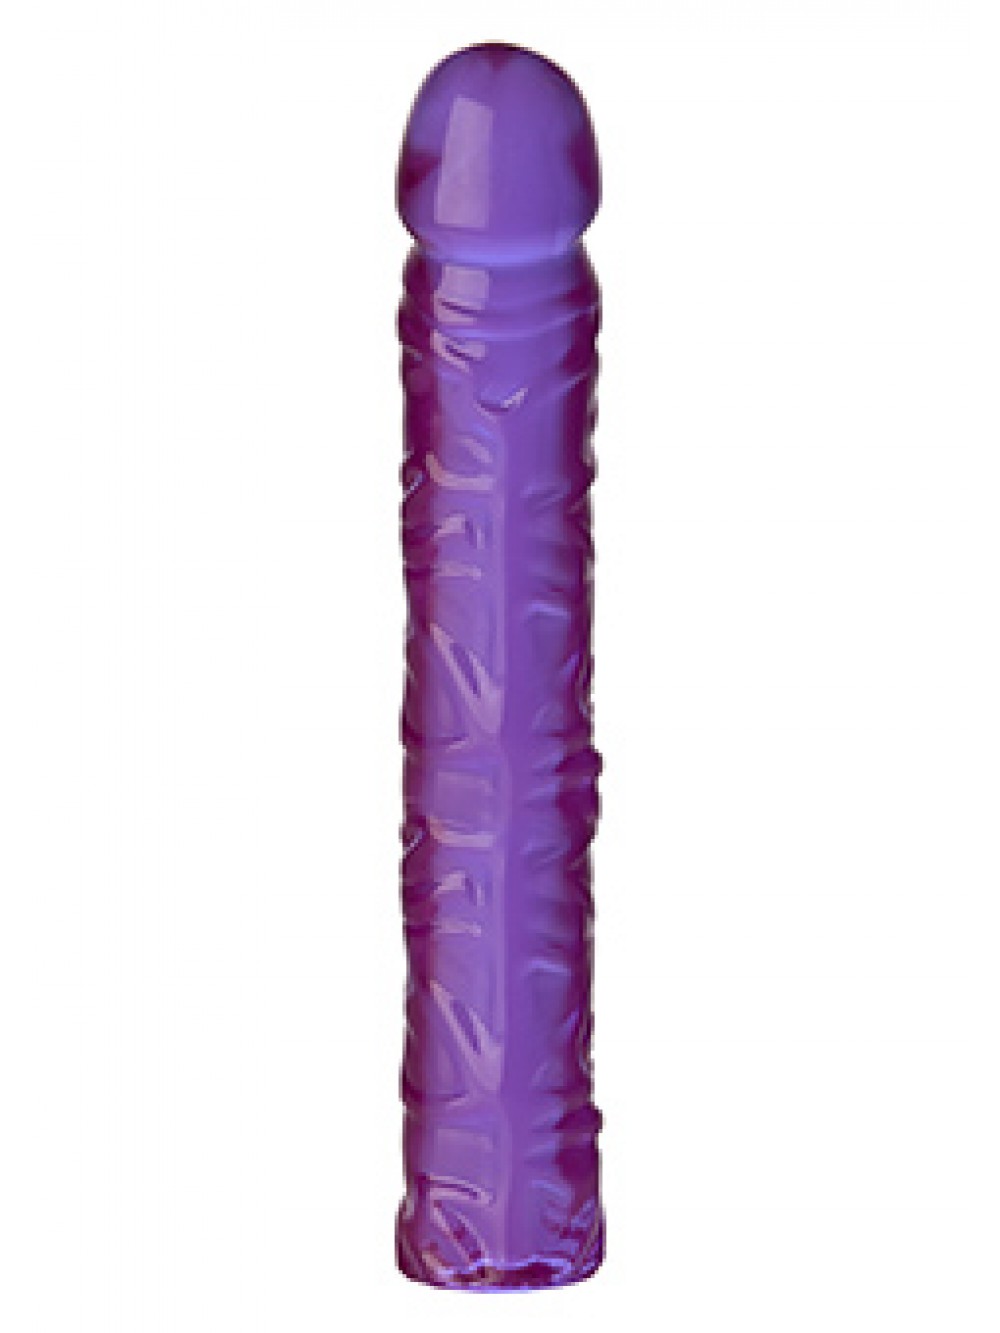 CLASSIC JELLY DONG 10'' PURPLE